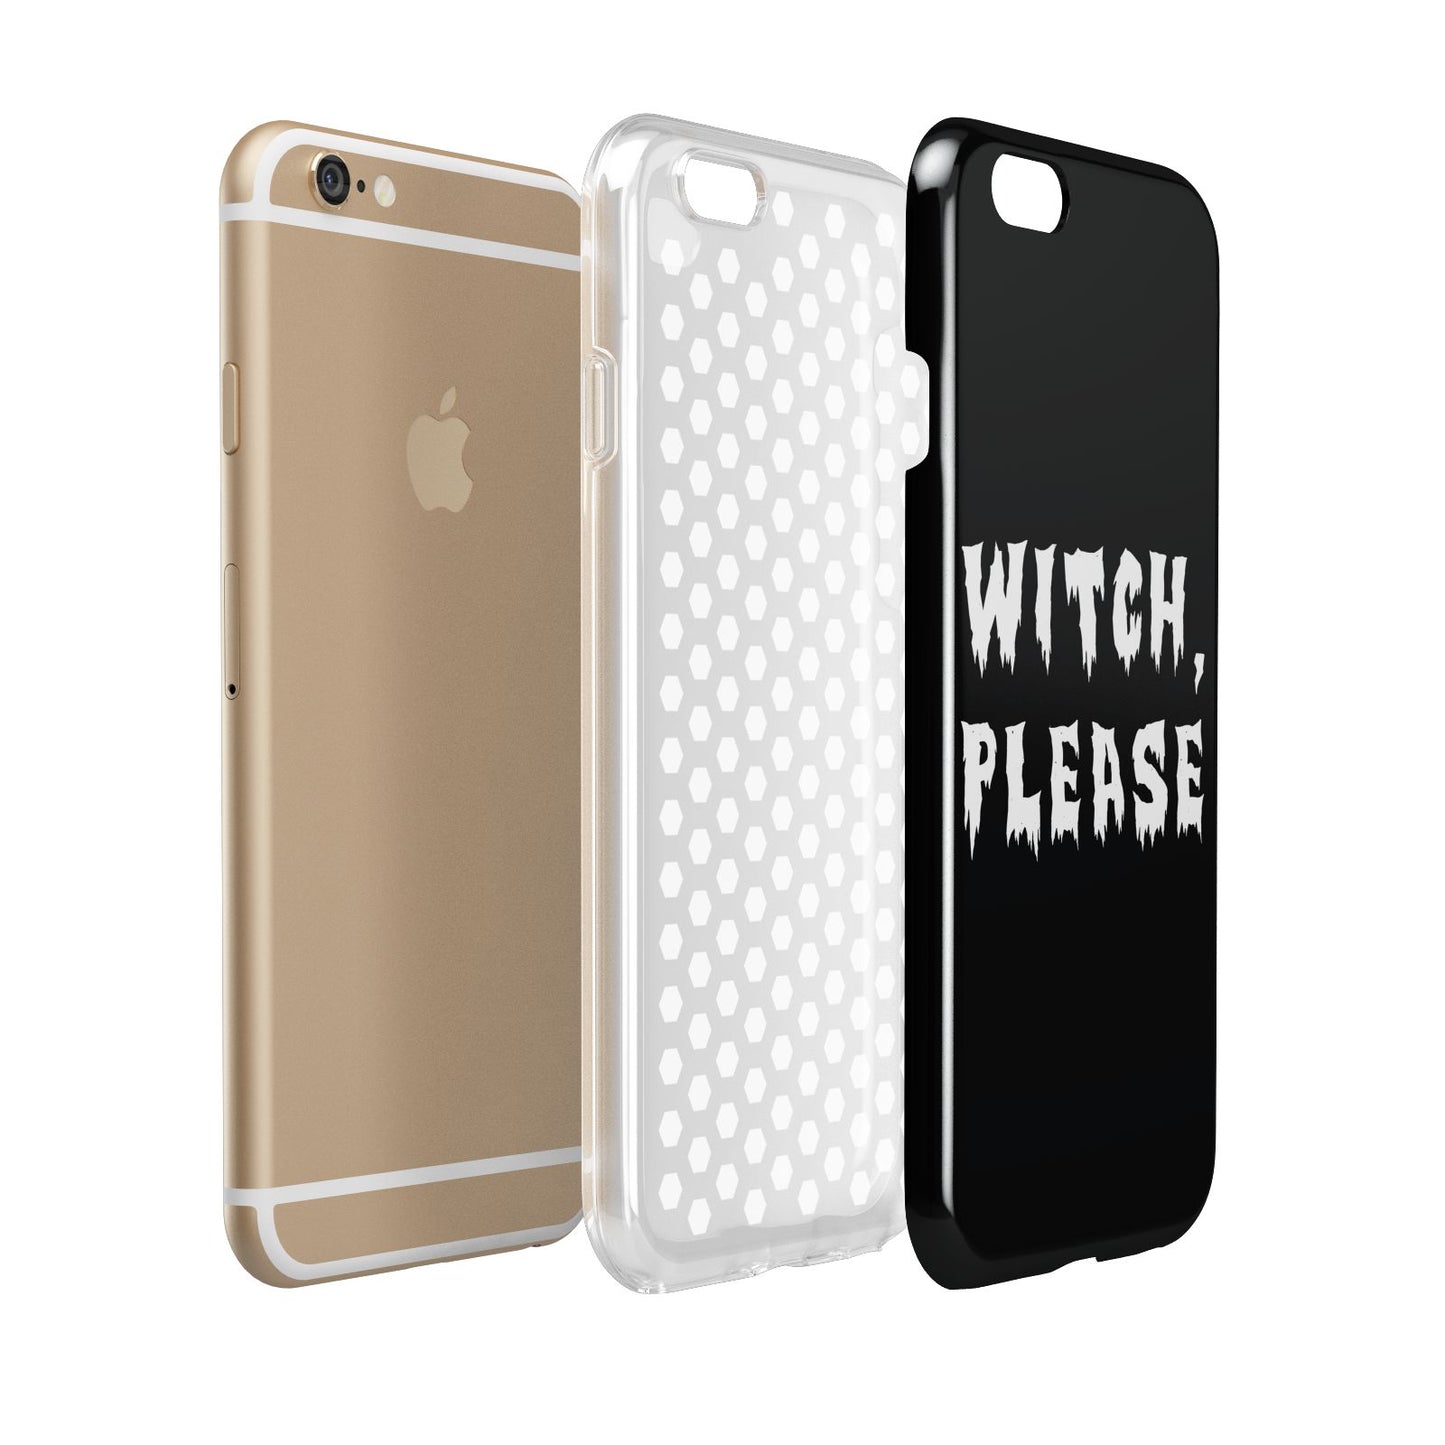 Witch Please Apple iPhone 6 3D Tough Case Expanded view